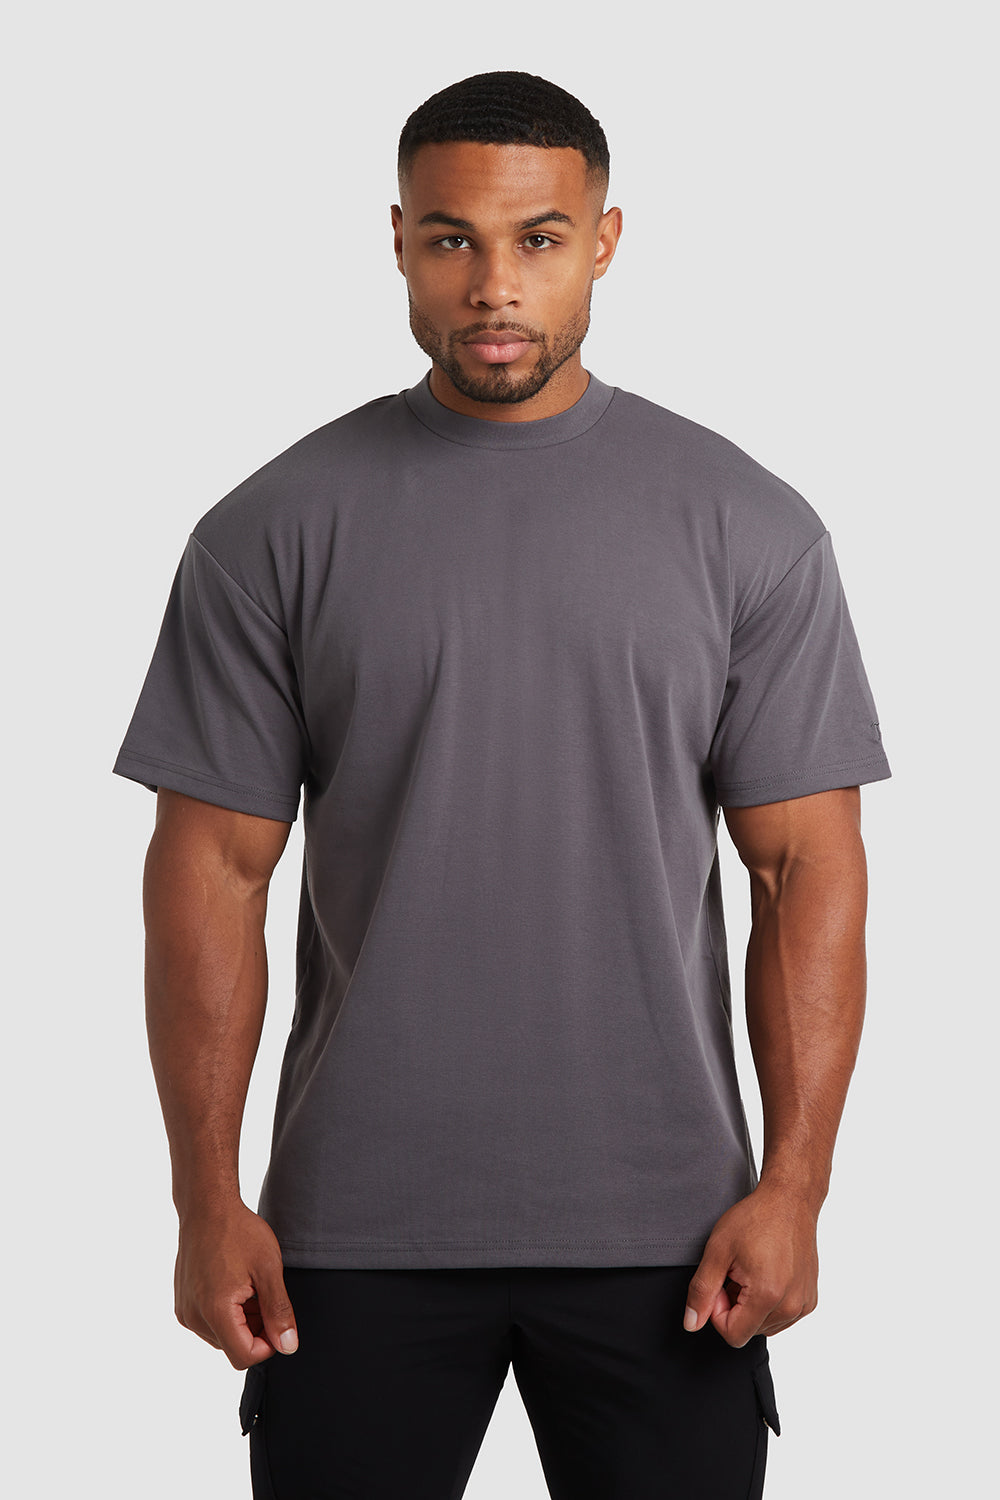 Athletic Fit T-Shirts - Tailored Athlete - TAILORED ATHLETE - USA